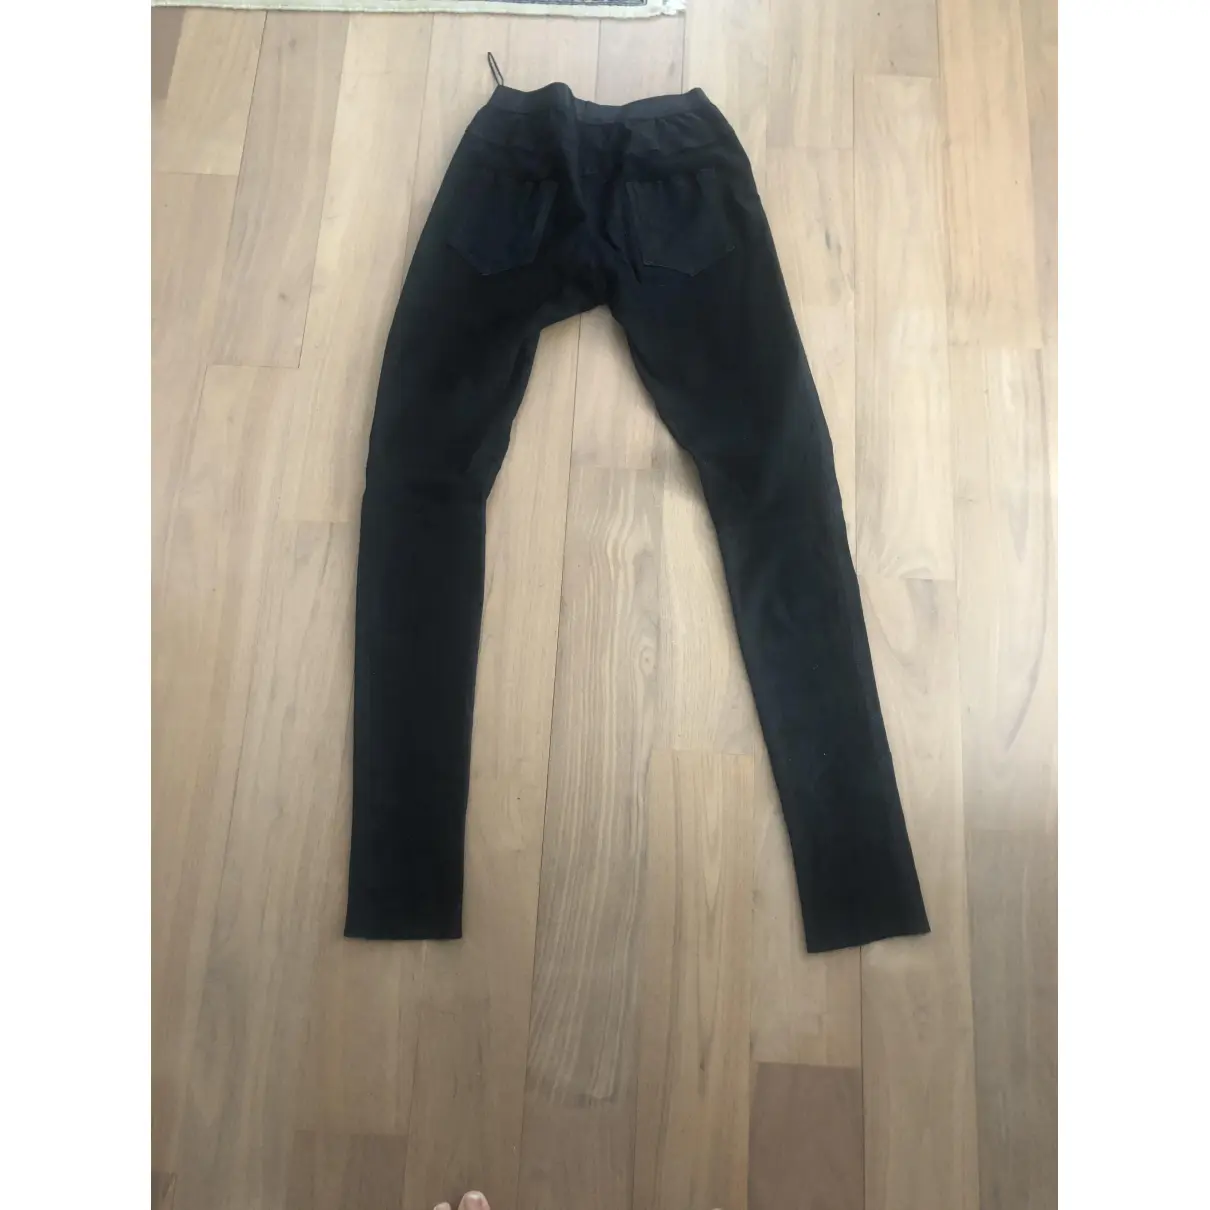 Buy Les Chiffoniers Black Suede Trousers online